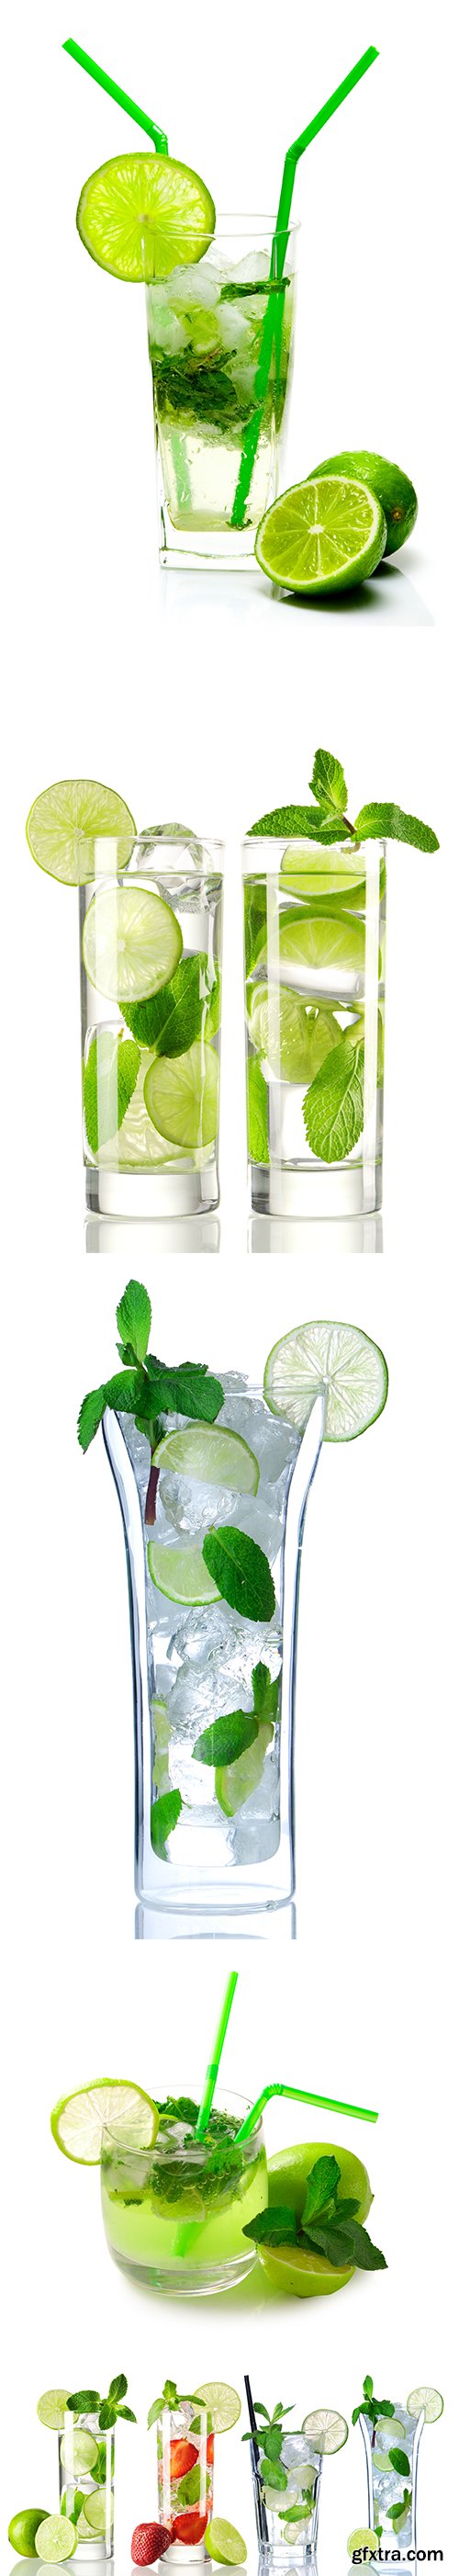 Mojito Cocktail Isolated - 15xJPGs